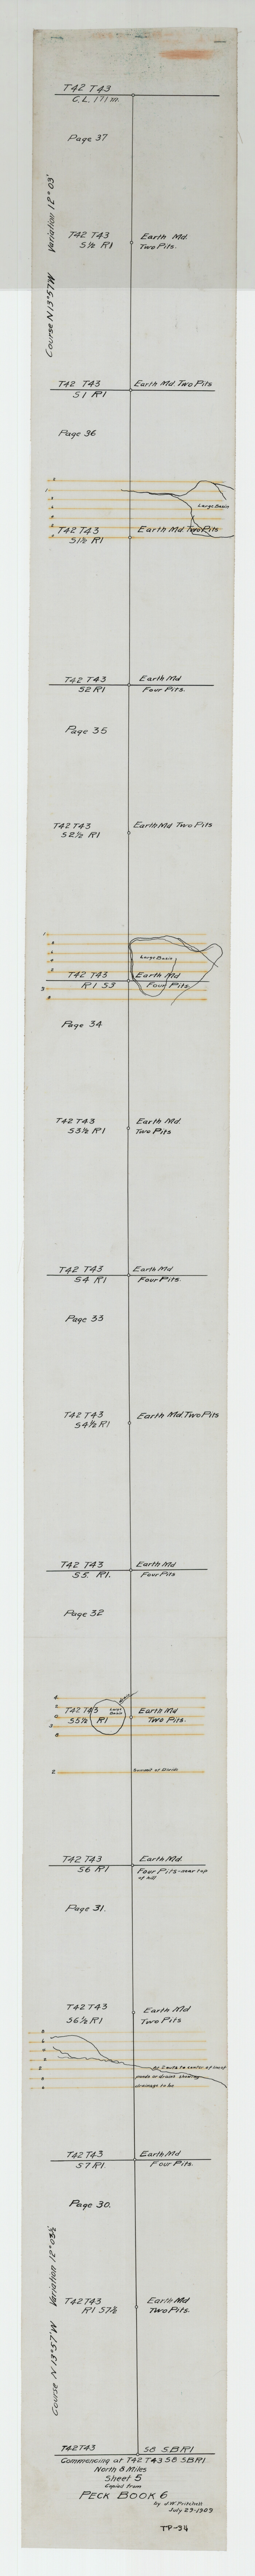 93171, Sheet 5 copied from Peck Book 6 [Strip Map showing T. & P. connecting lines], Twichell Survey Records